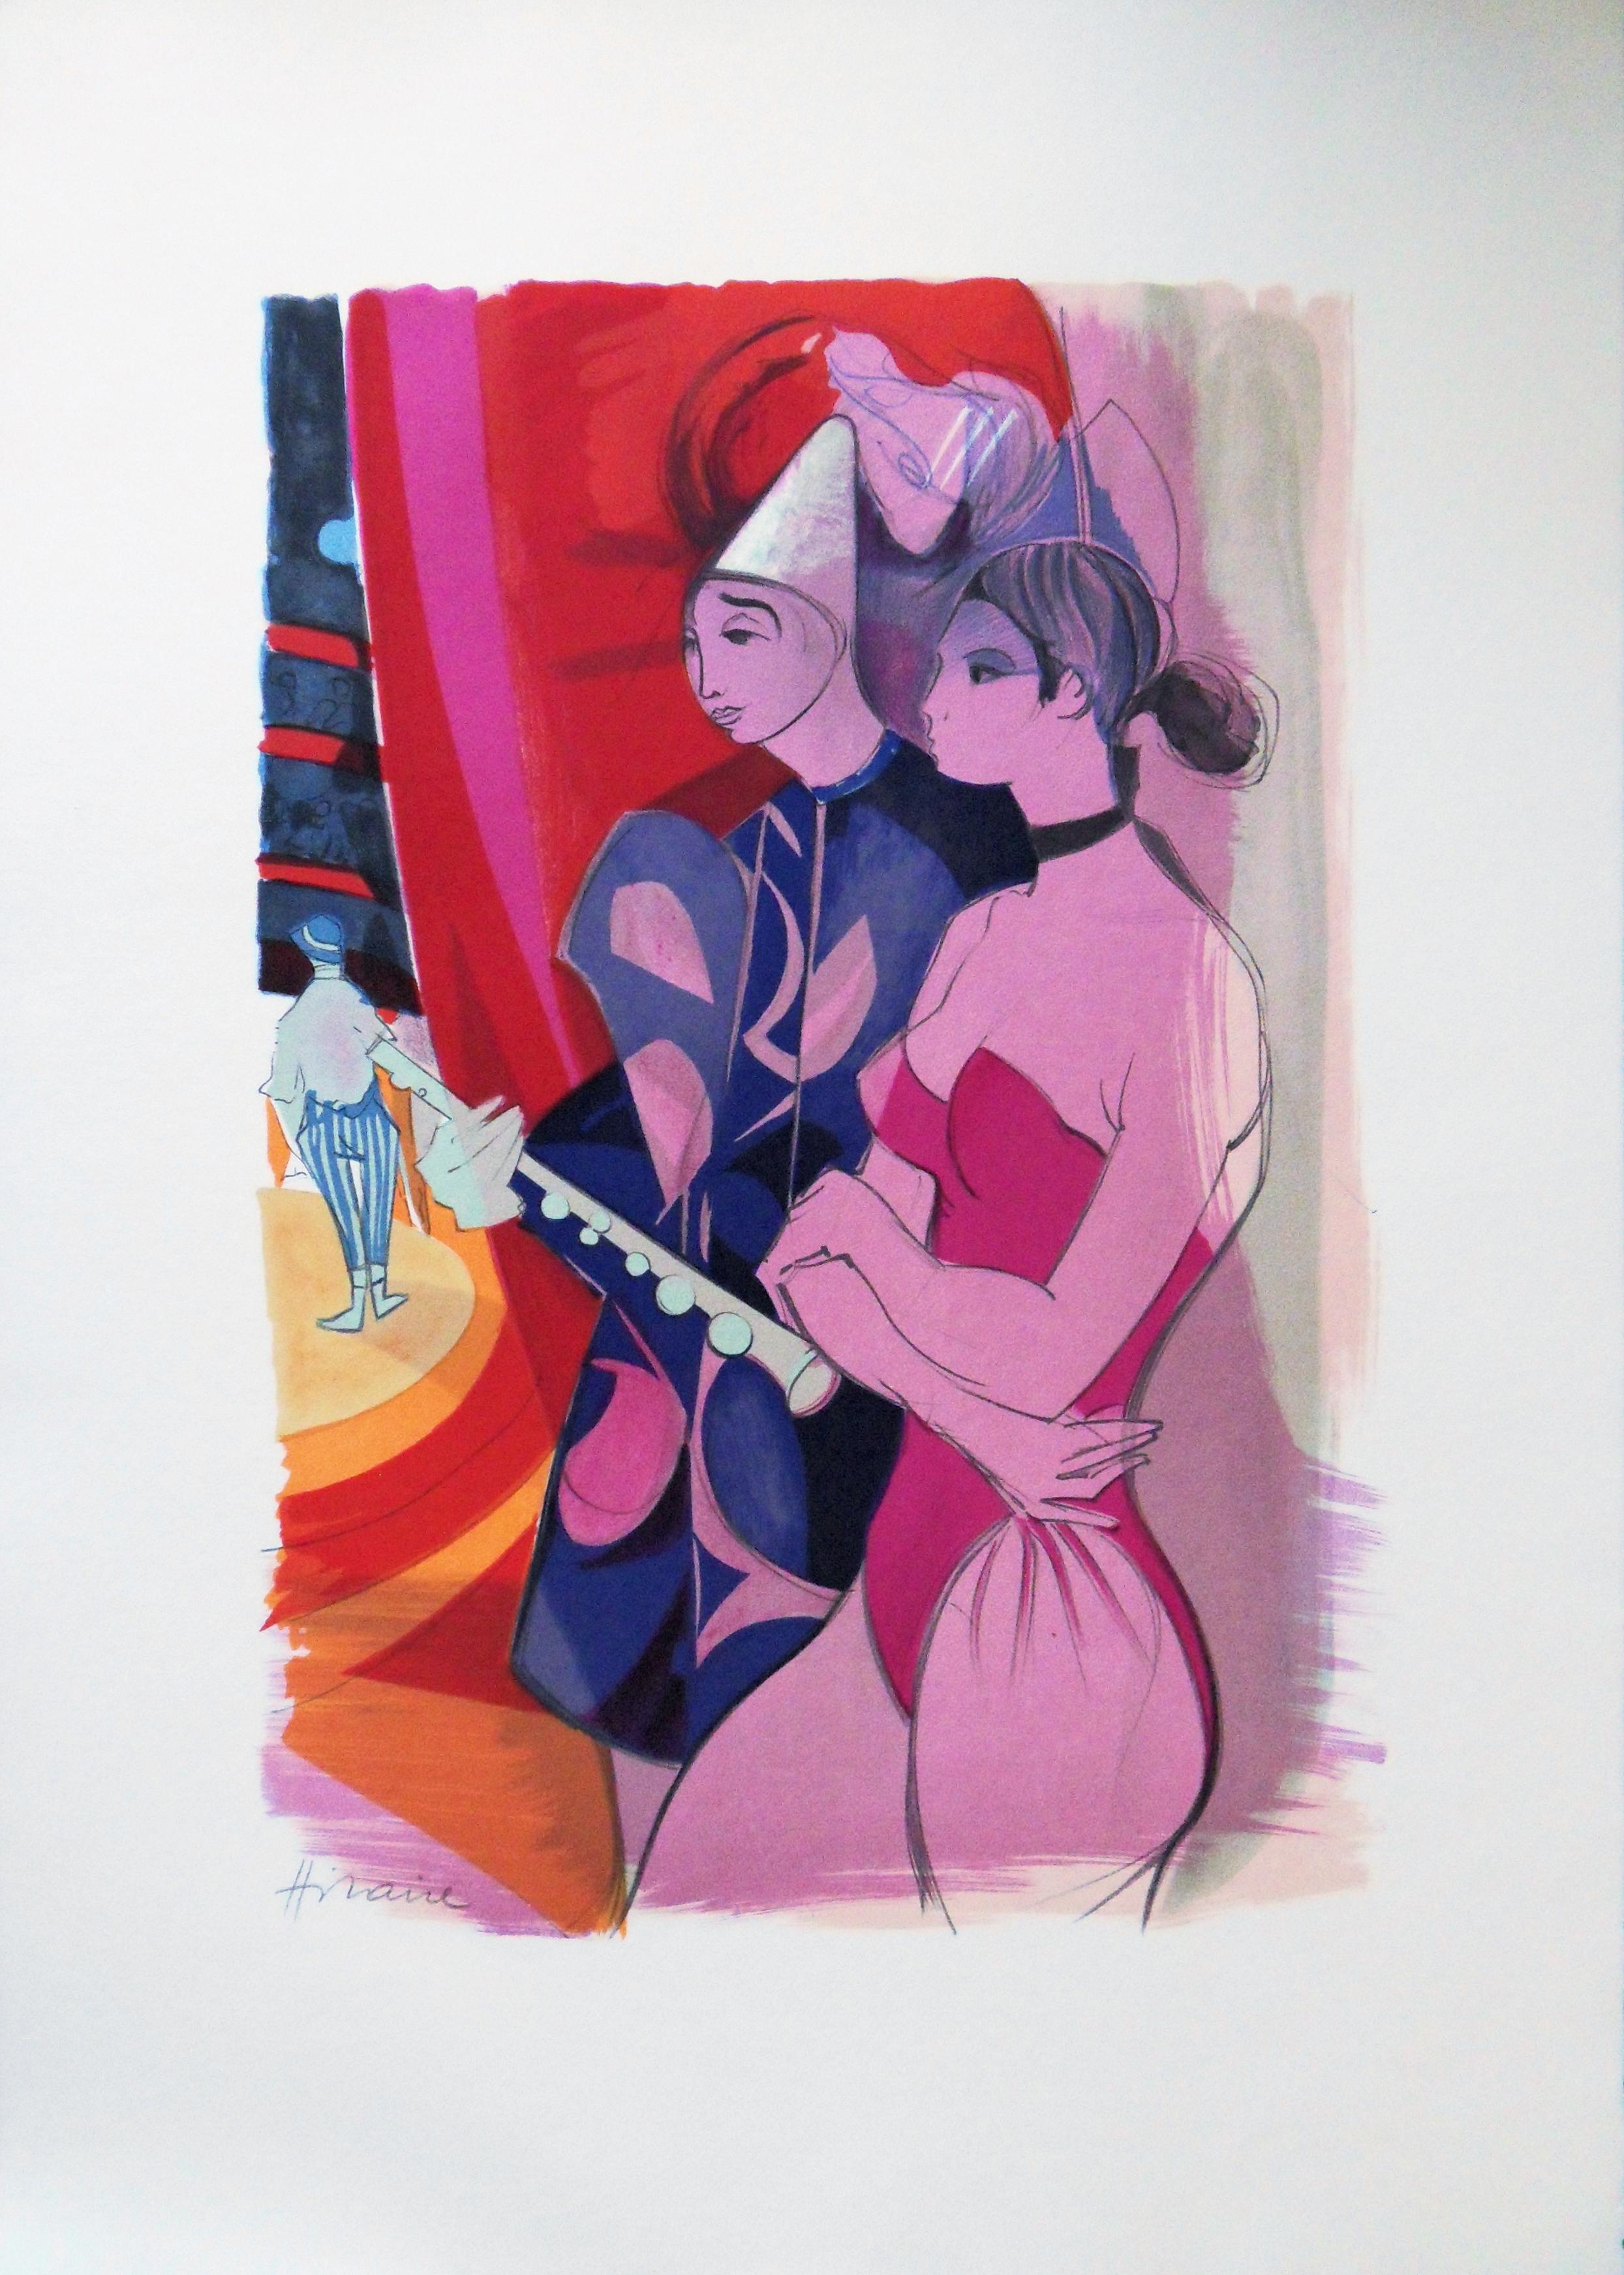 Camille Hilaire Figurative Print - Circus : Pierrot Clown and Acrobat - Original handsigned lithograph